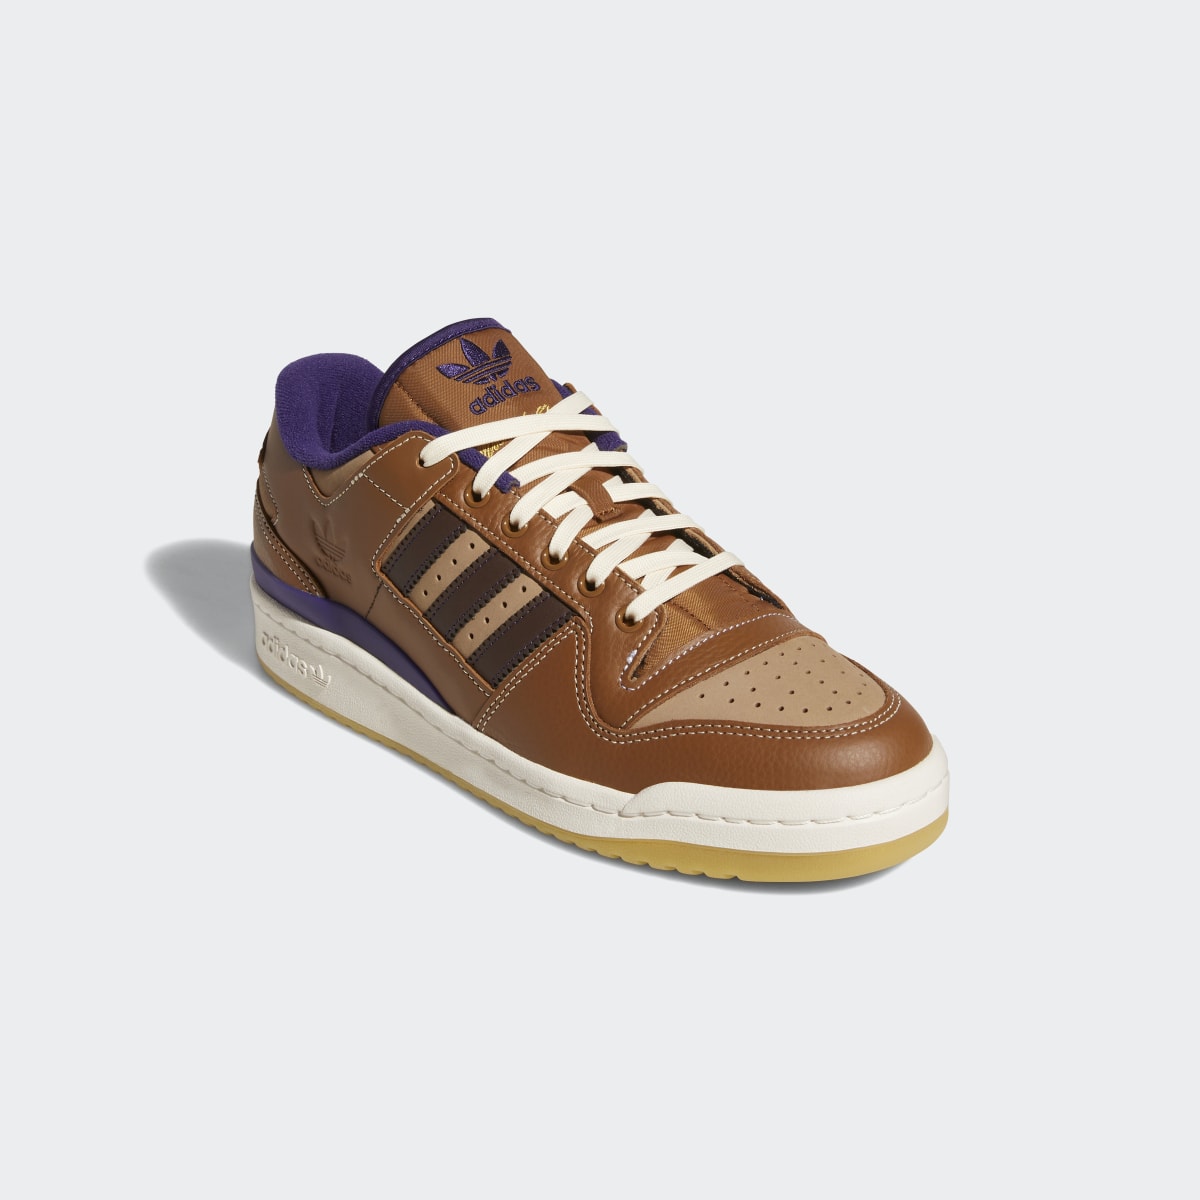 Adidas Heitor Forum 84 Low ADV Shoes. 7